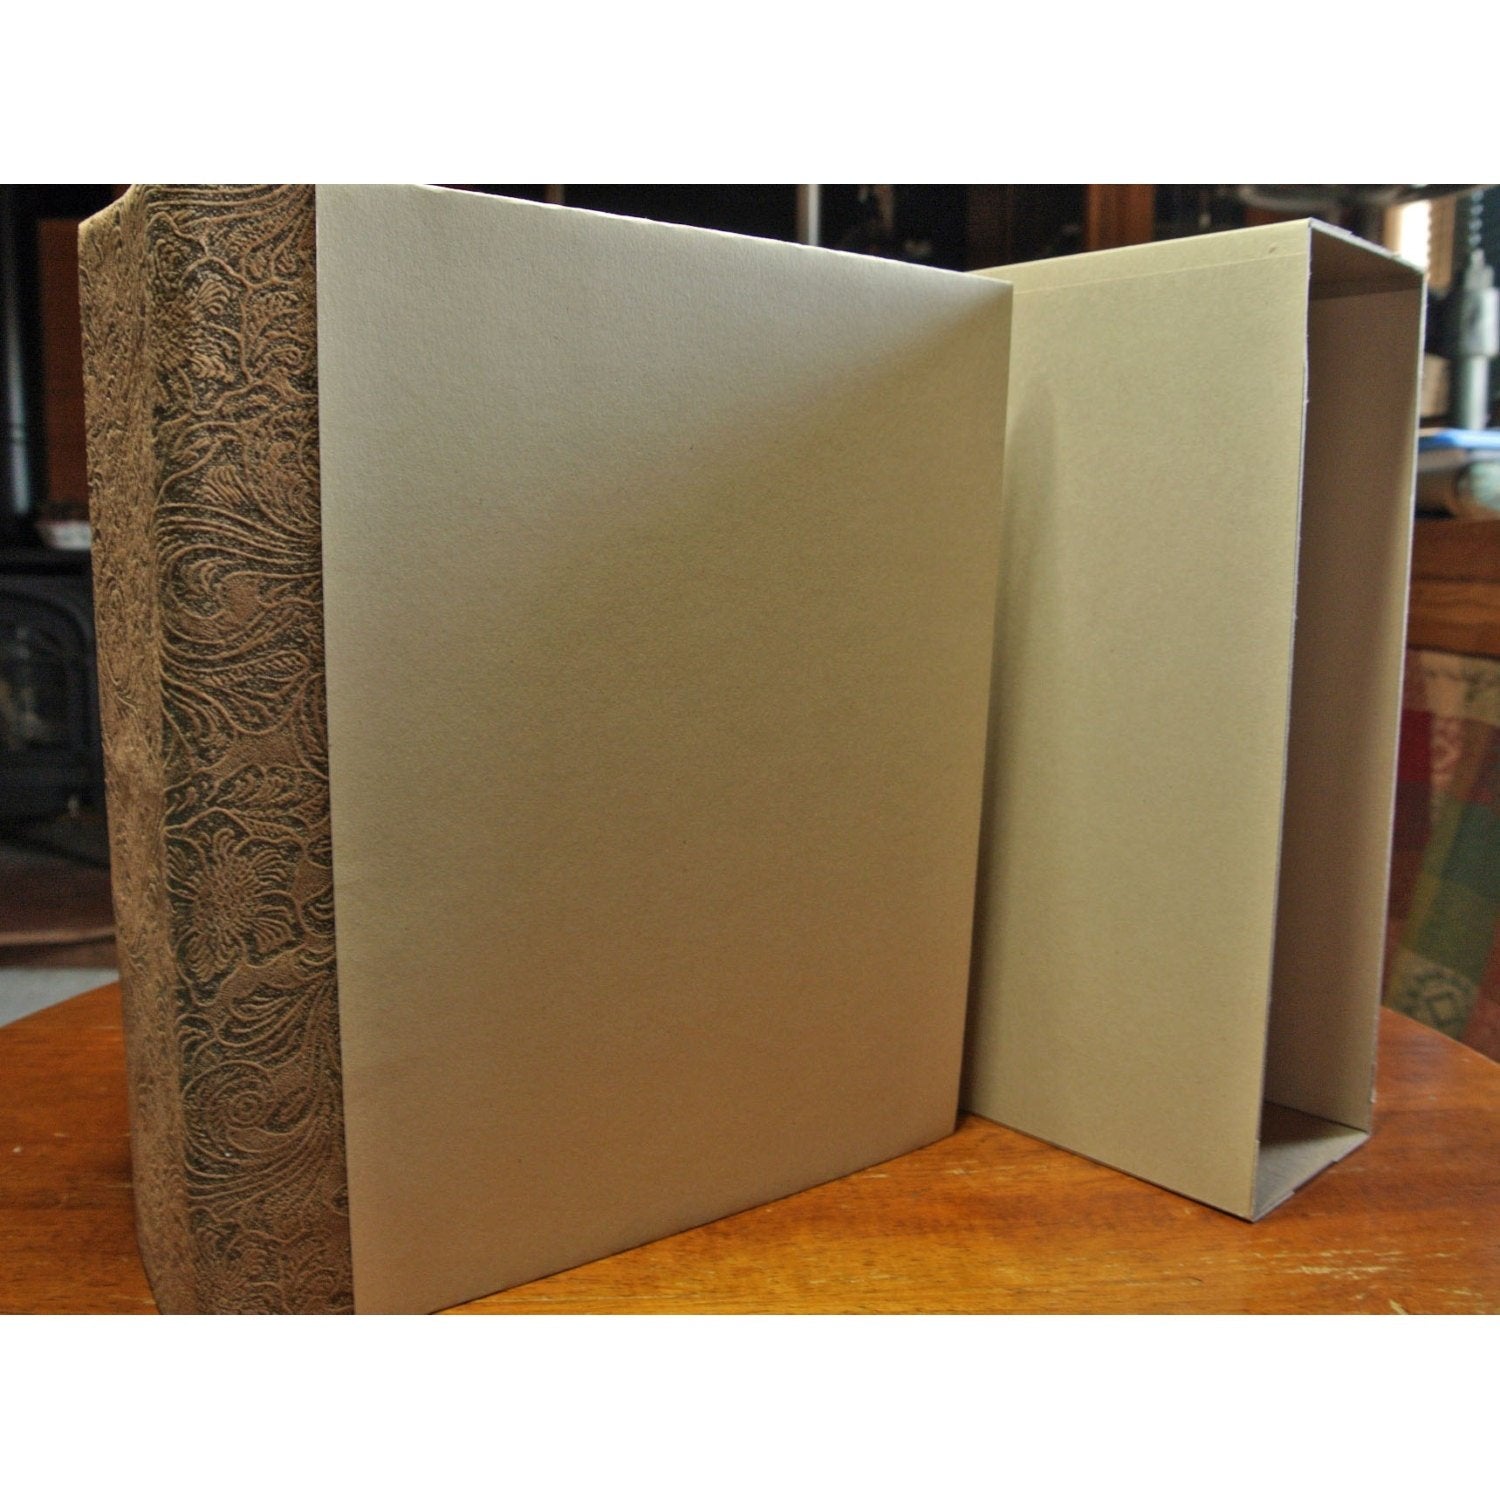 Giant Scrapbook in Bonded Leather - 18 in x 24 in